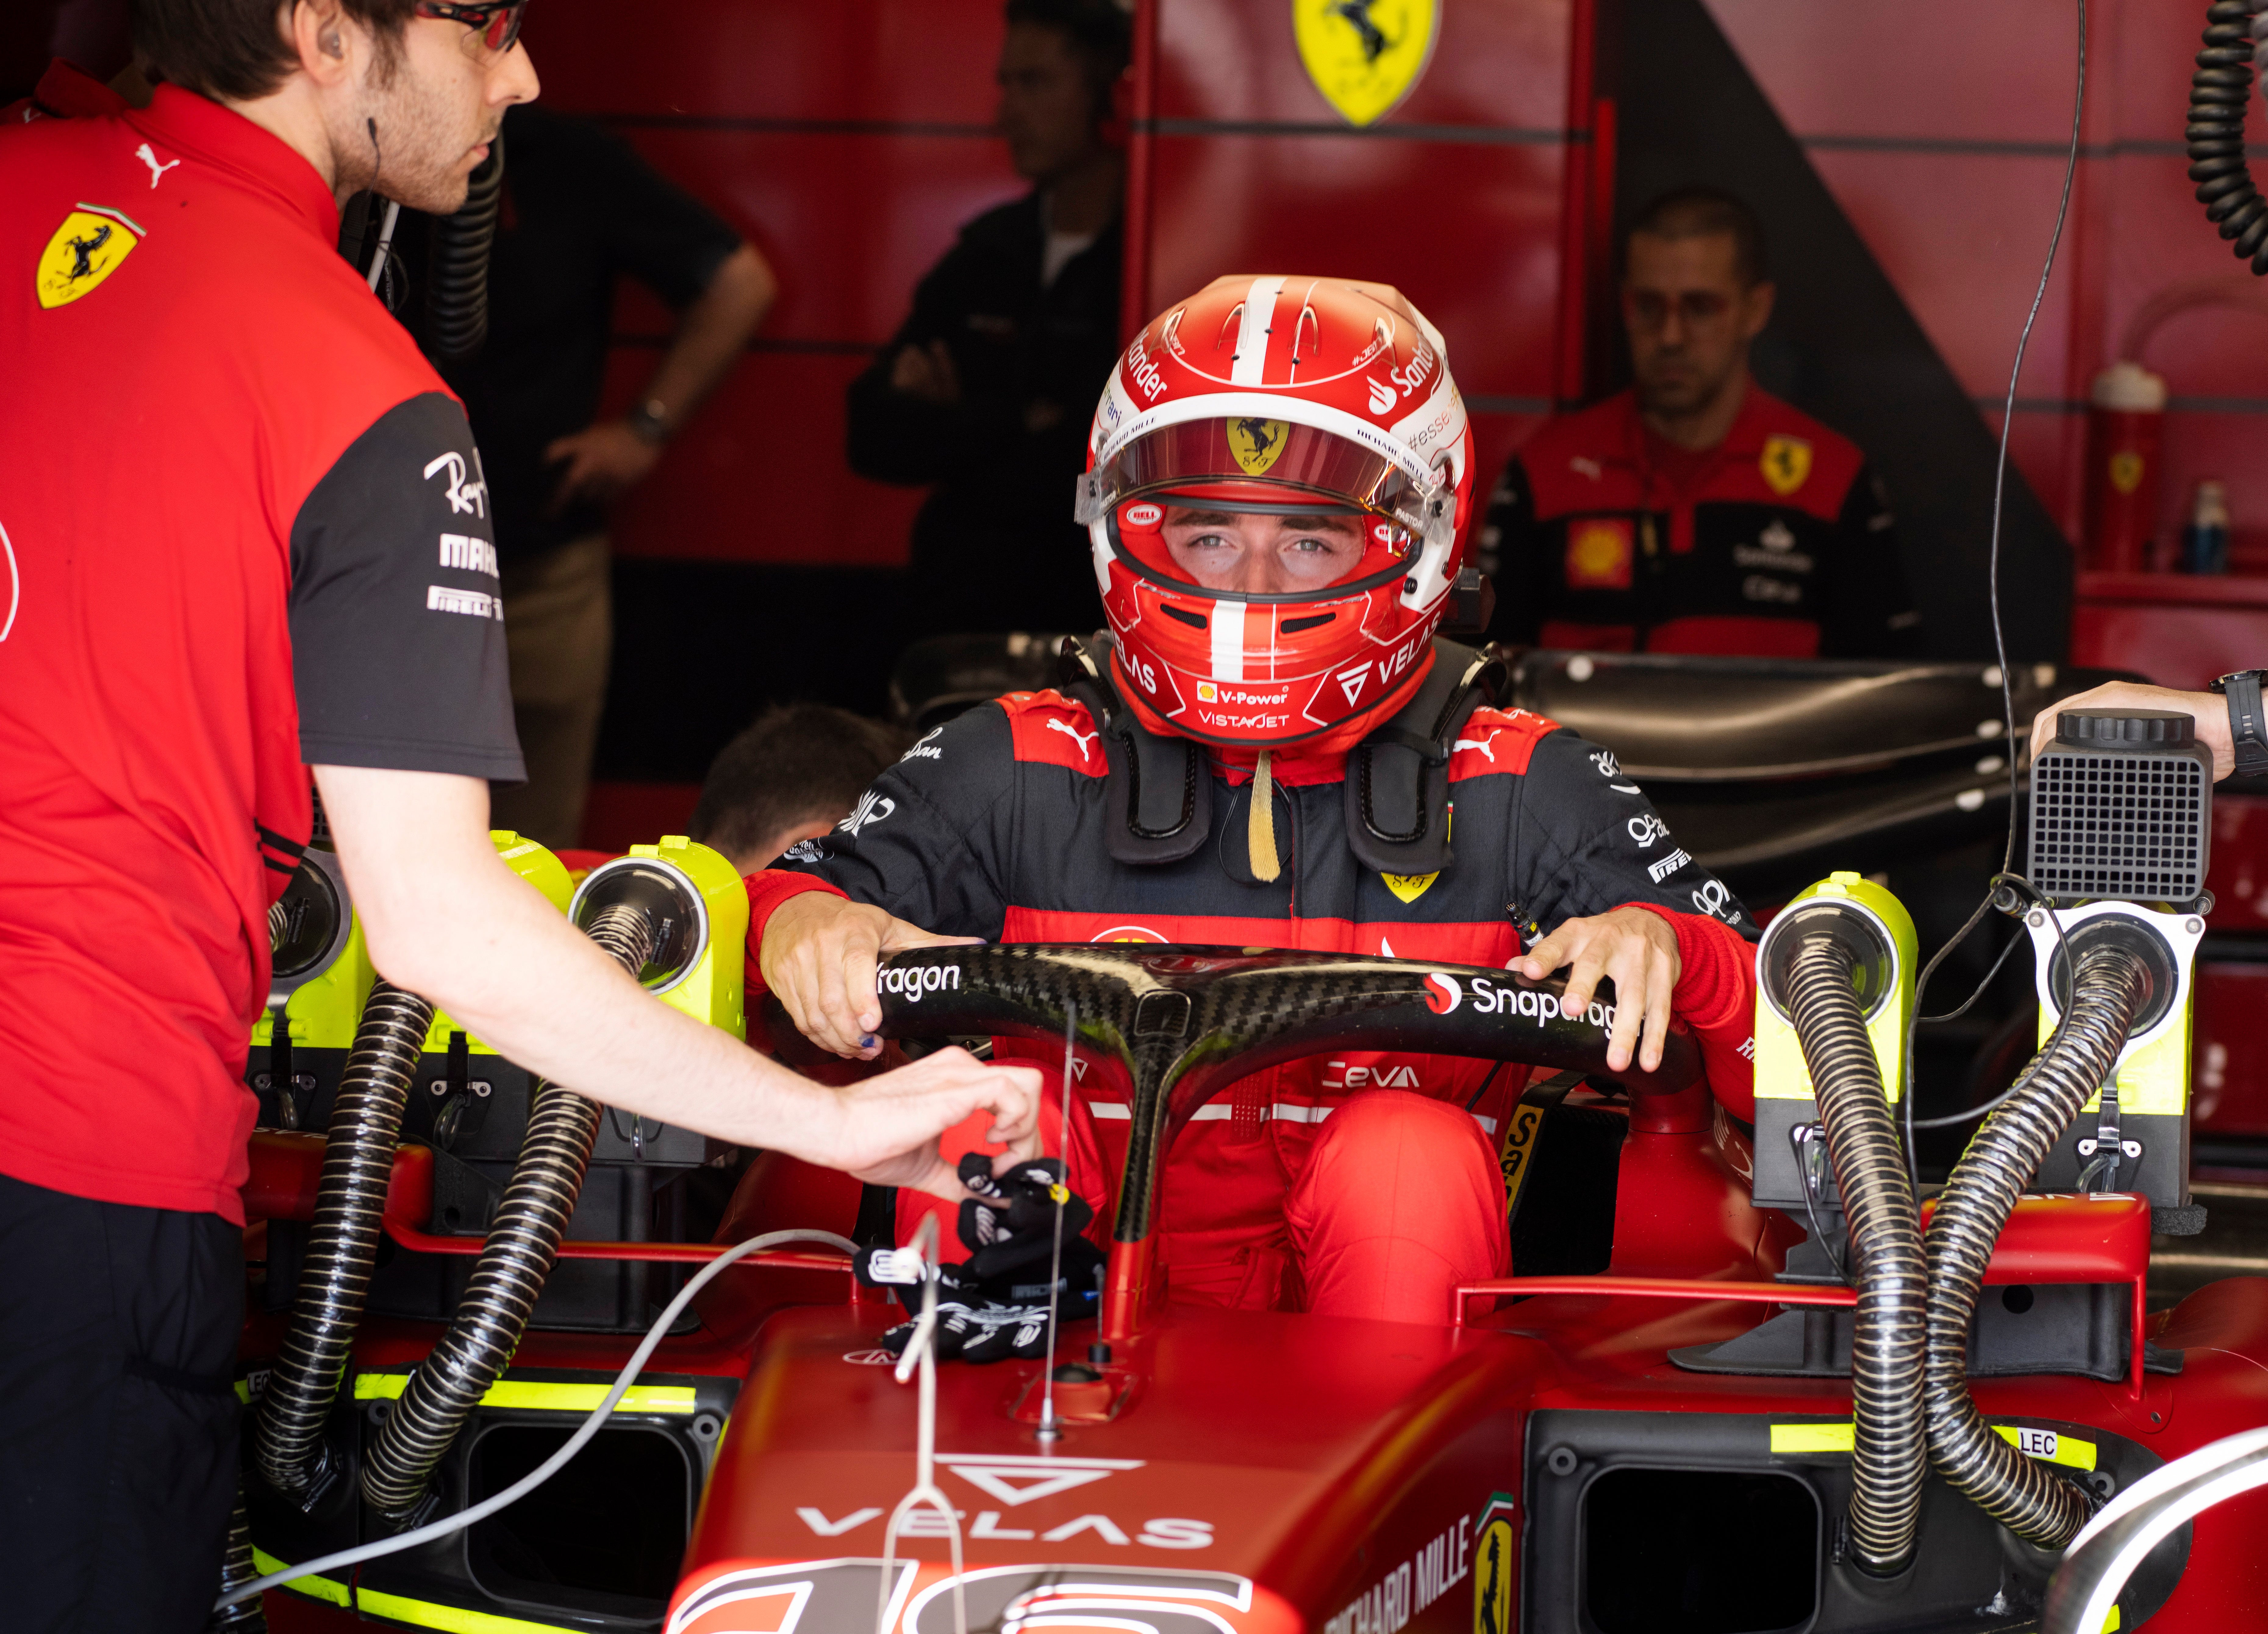 It has been a frustrating few weeks for Charles Leclerc and Ferrari